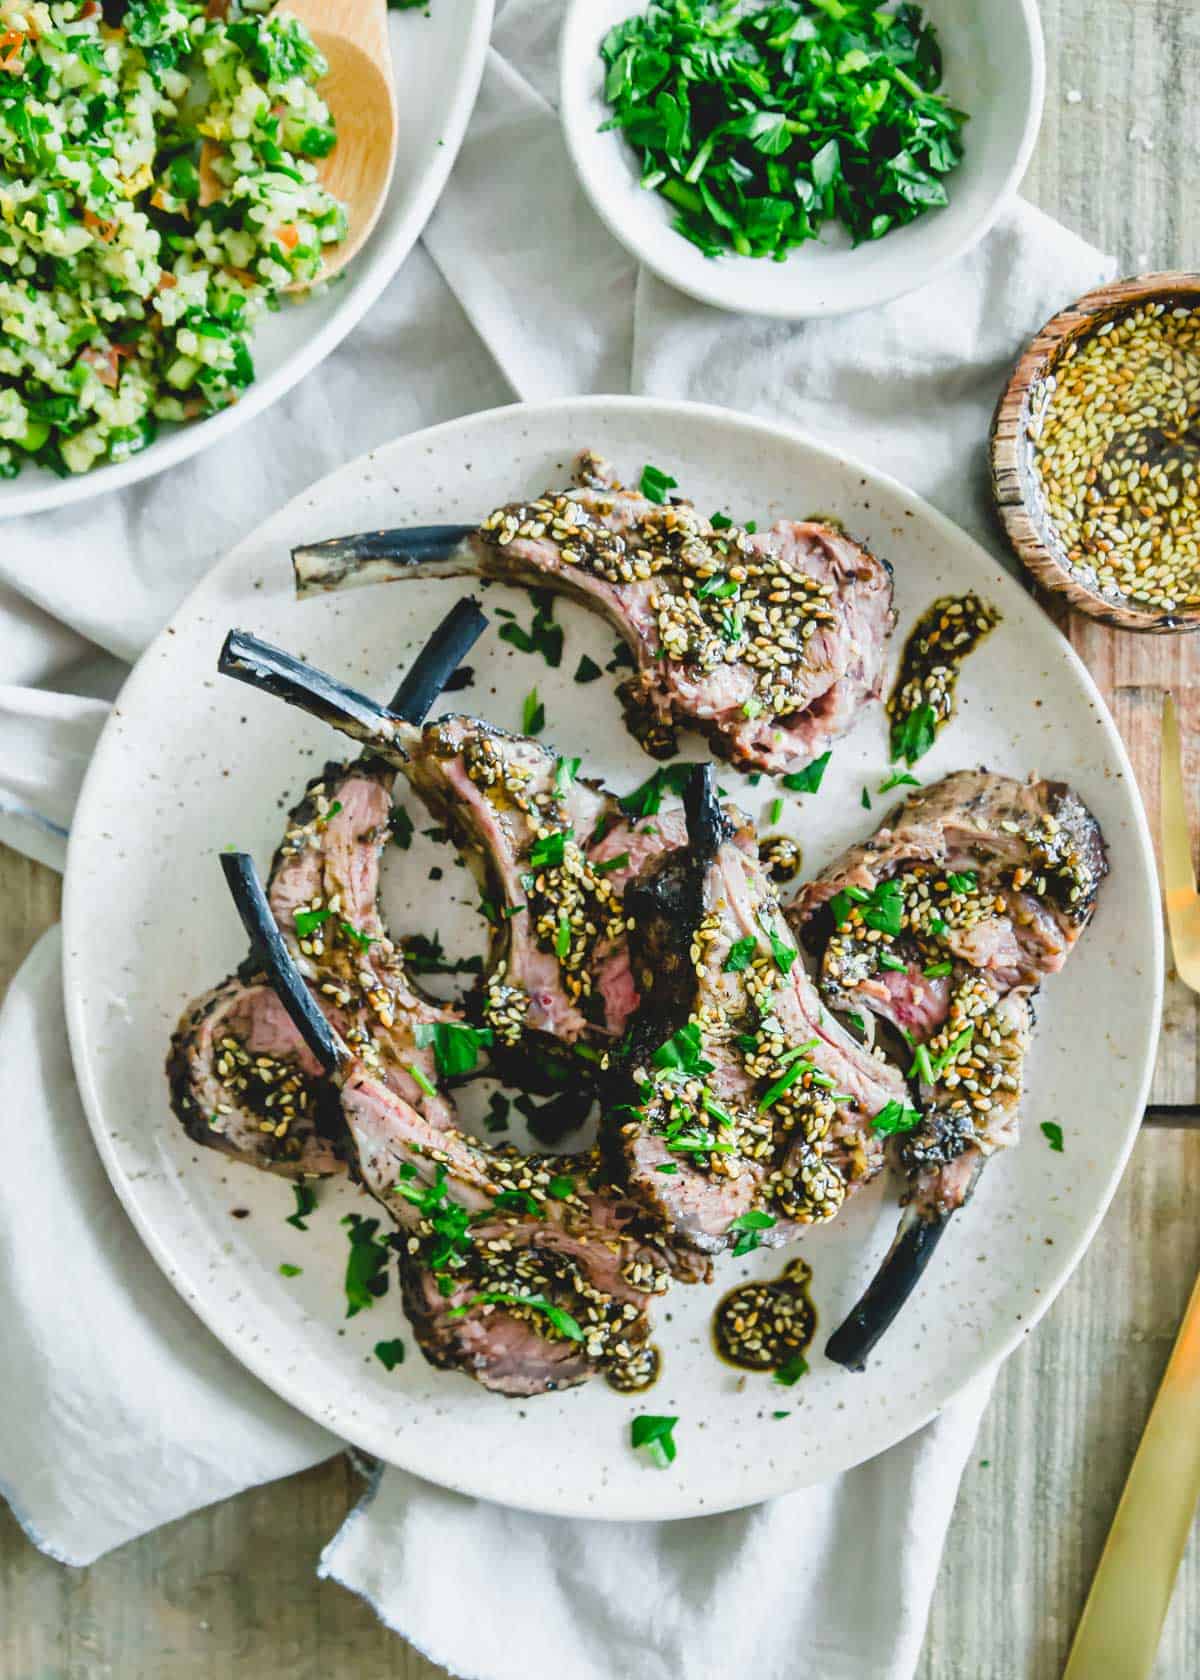 Simple grilled rack of lamb recipe with za'atar spice.